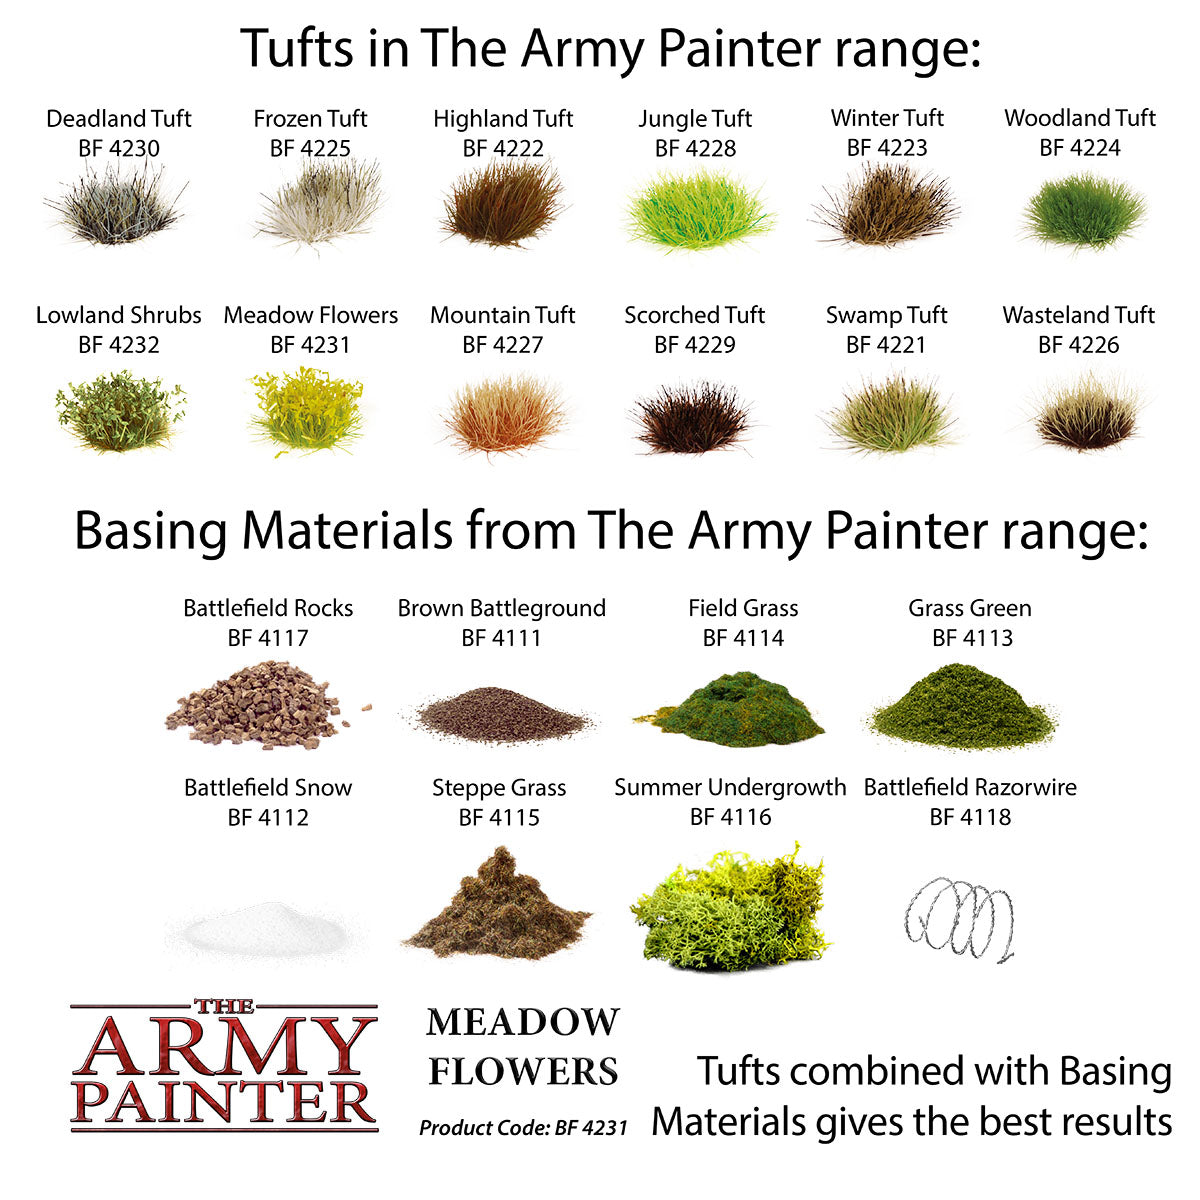 The Army Painter - Meadow Flowers BF4231